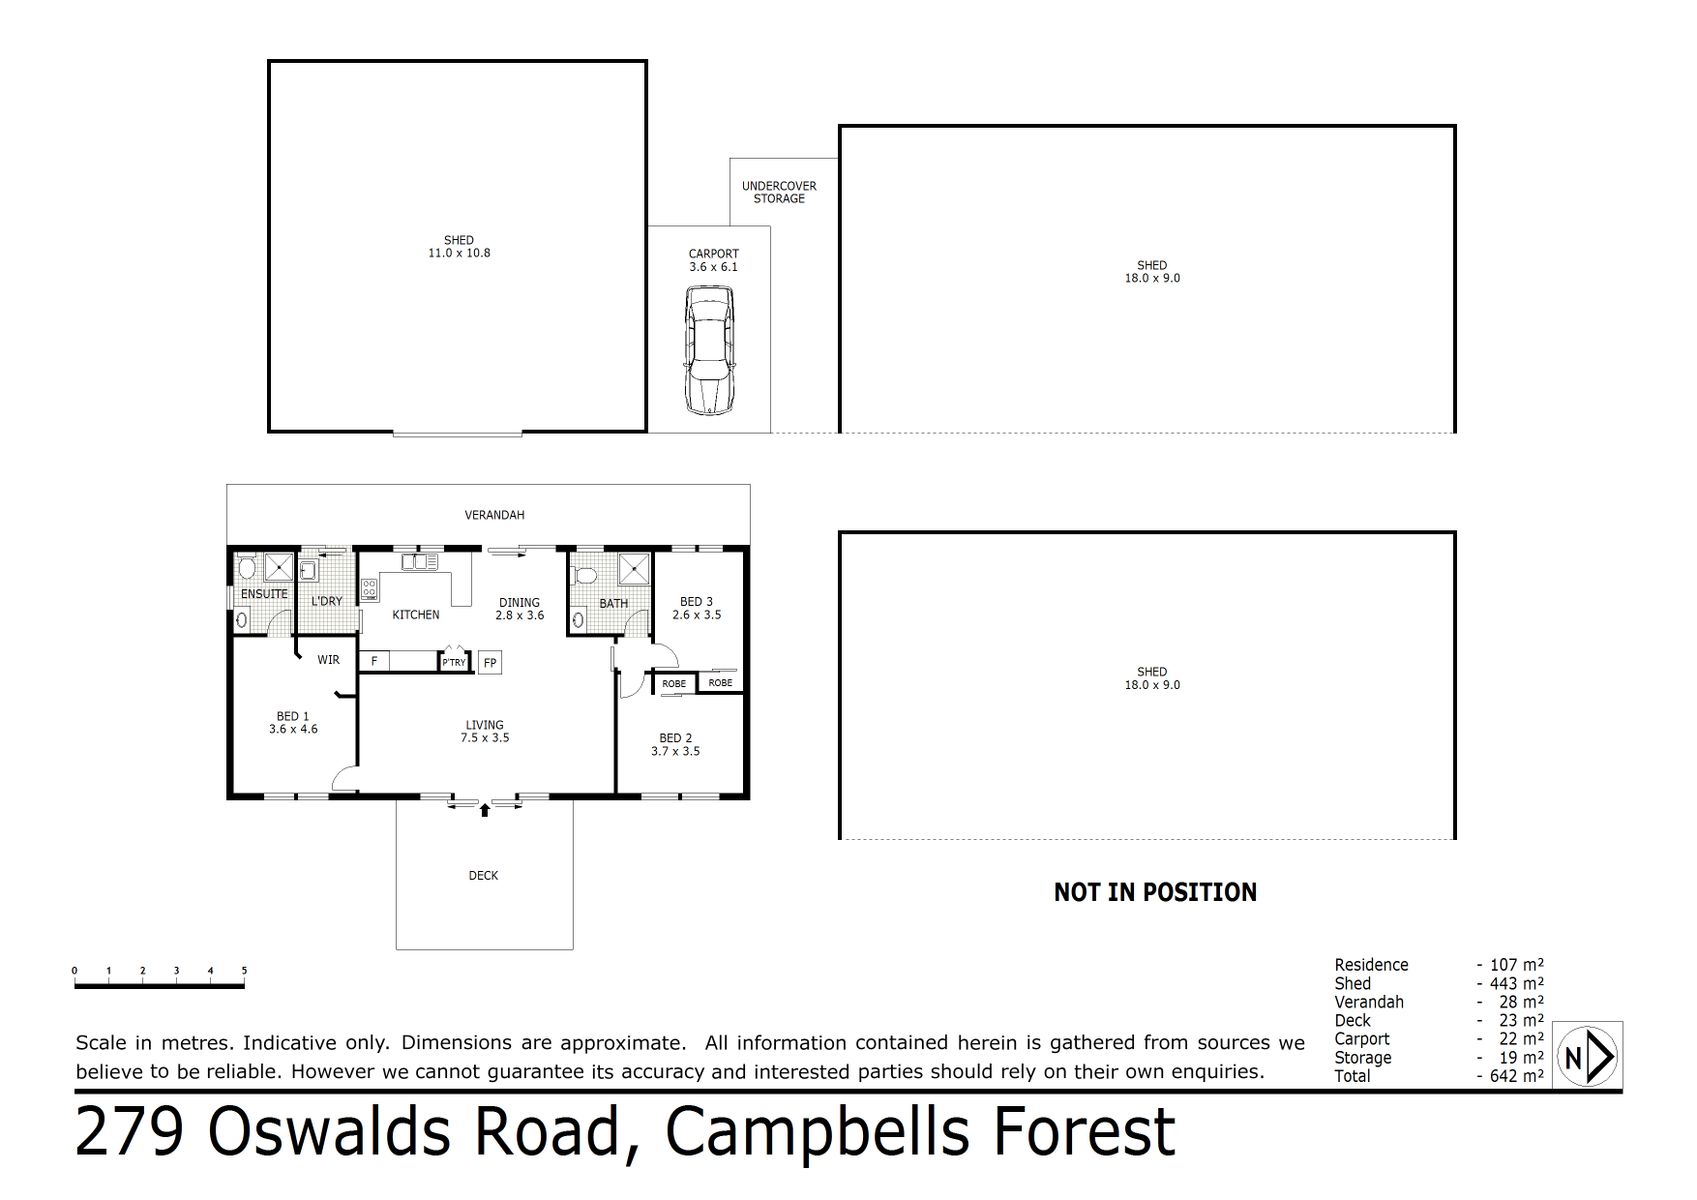 279 Oswalds Road Campbells Forest (14 OCT 2021) 107sqm